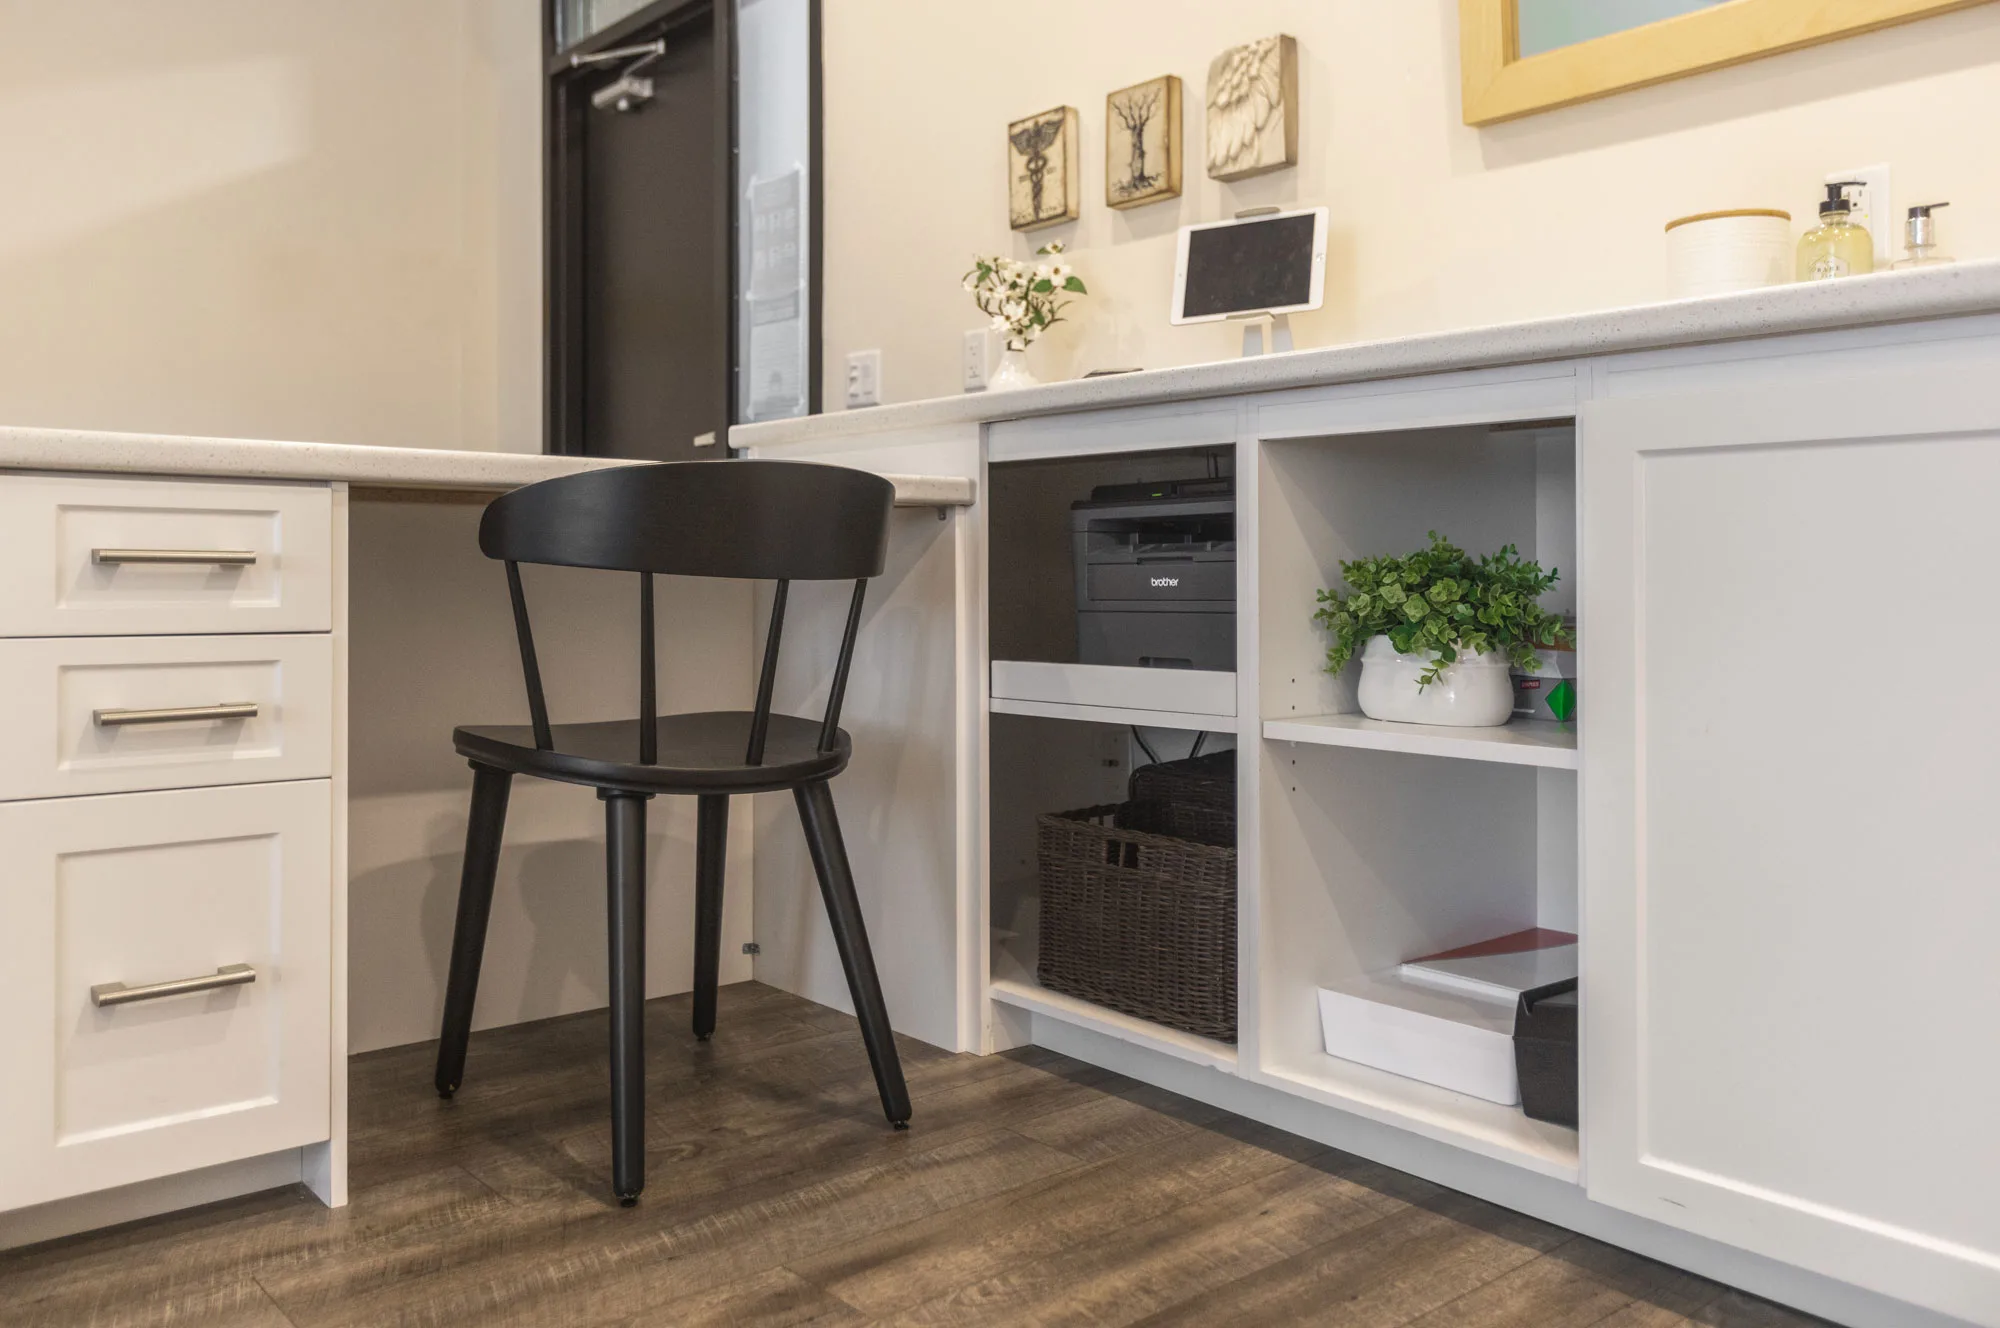 A close up of the back of a white cupboard reception area with a black chair and lower cupboards to store a printer and paper.